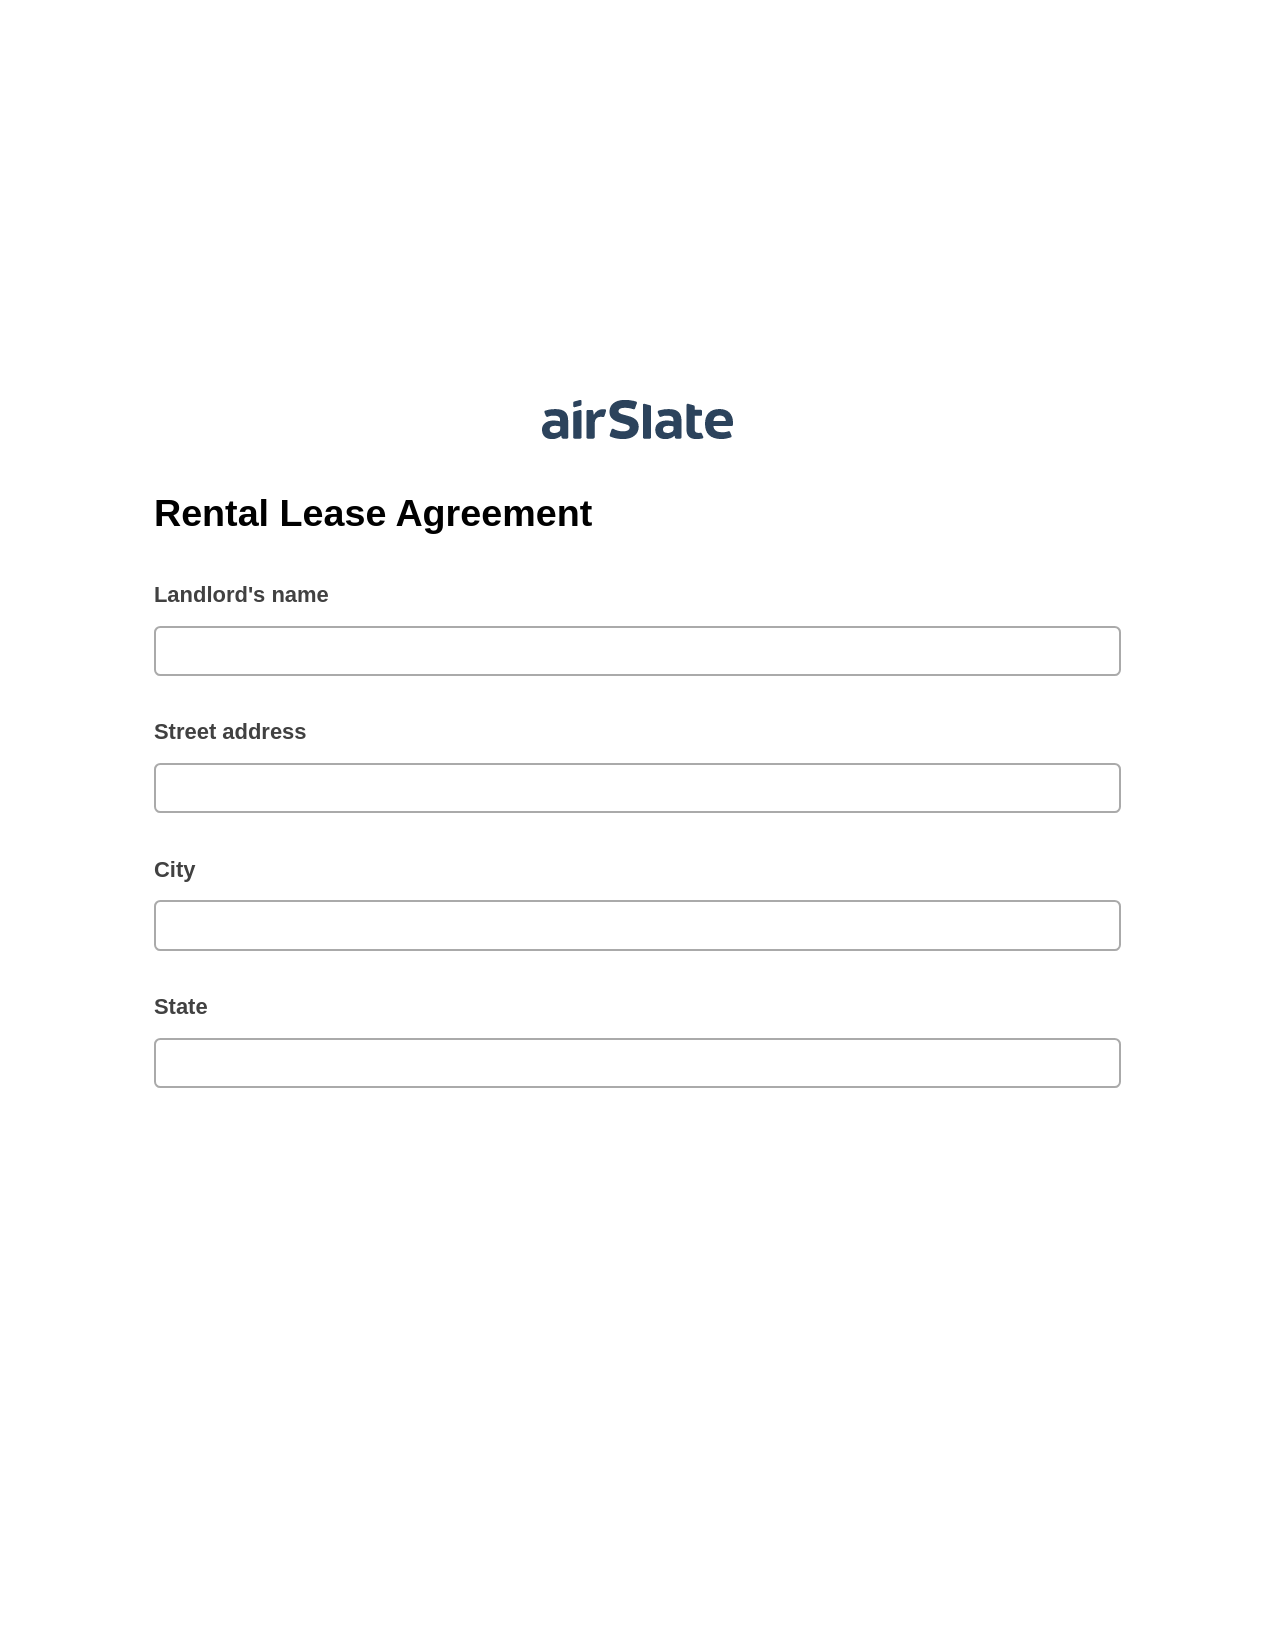 Rental Lease Agreement Pre-fill from NetSuite Records Bot, Jira Bot, Export to Excel 365 Bot